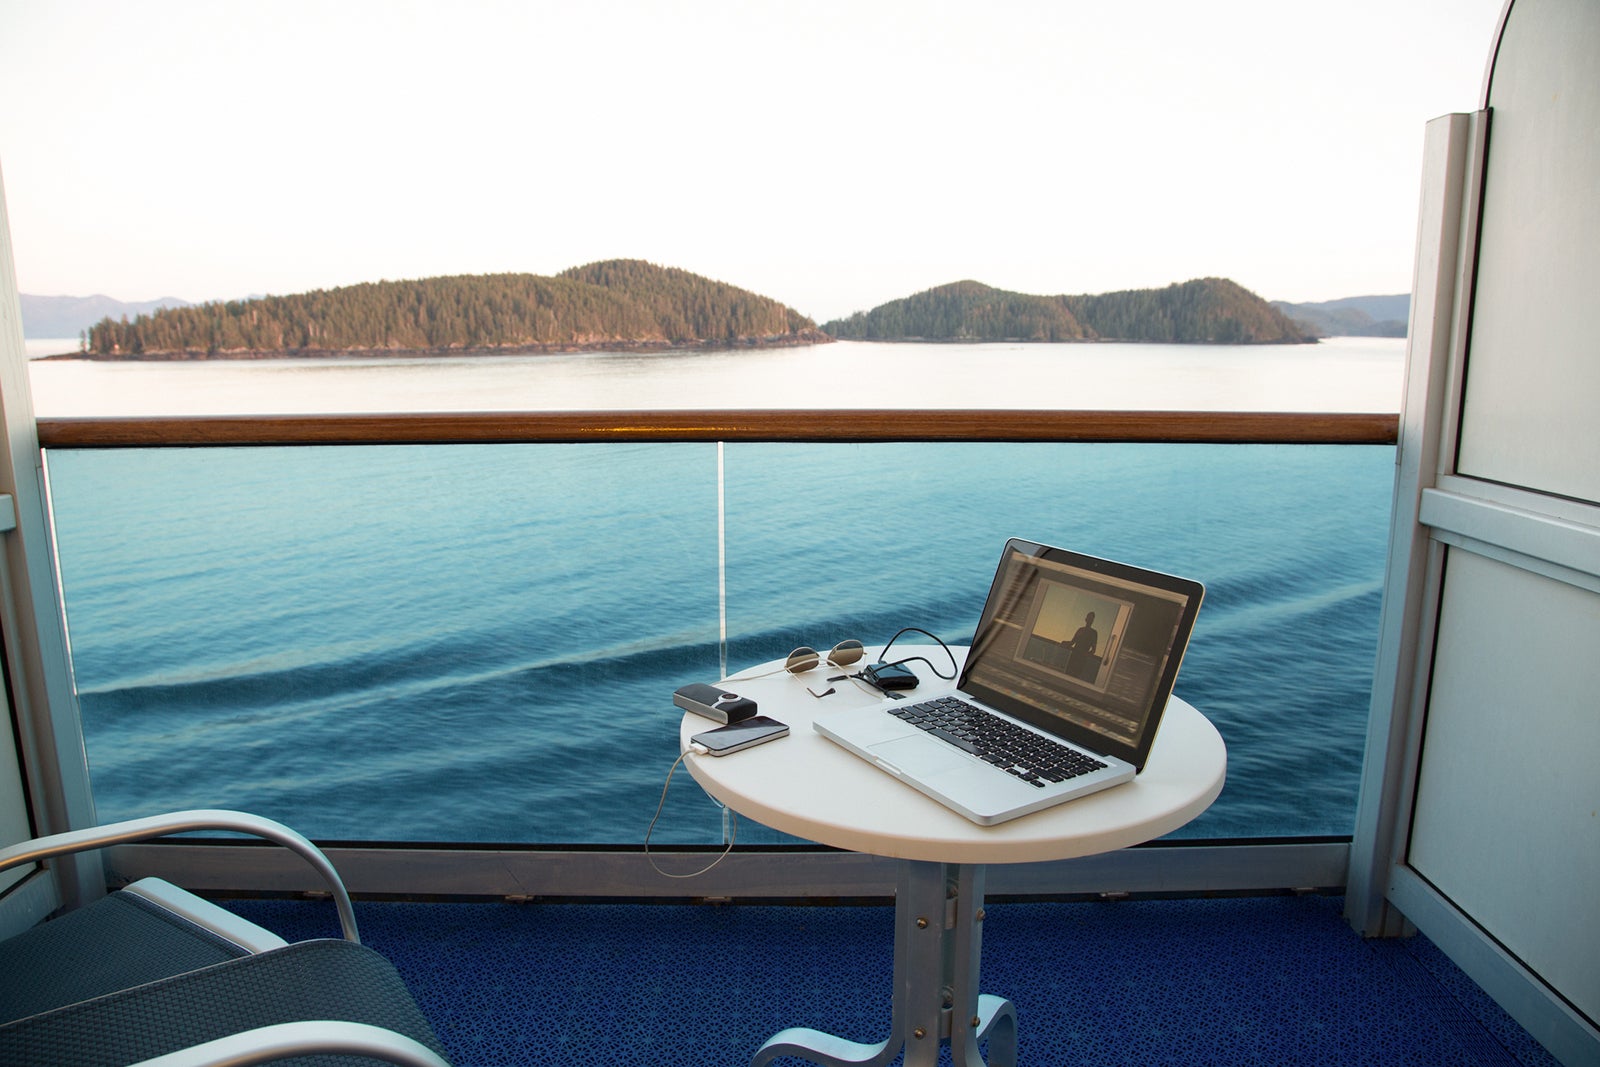 princess cruises internet packages cost